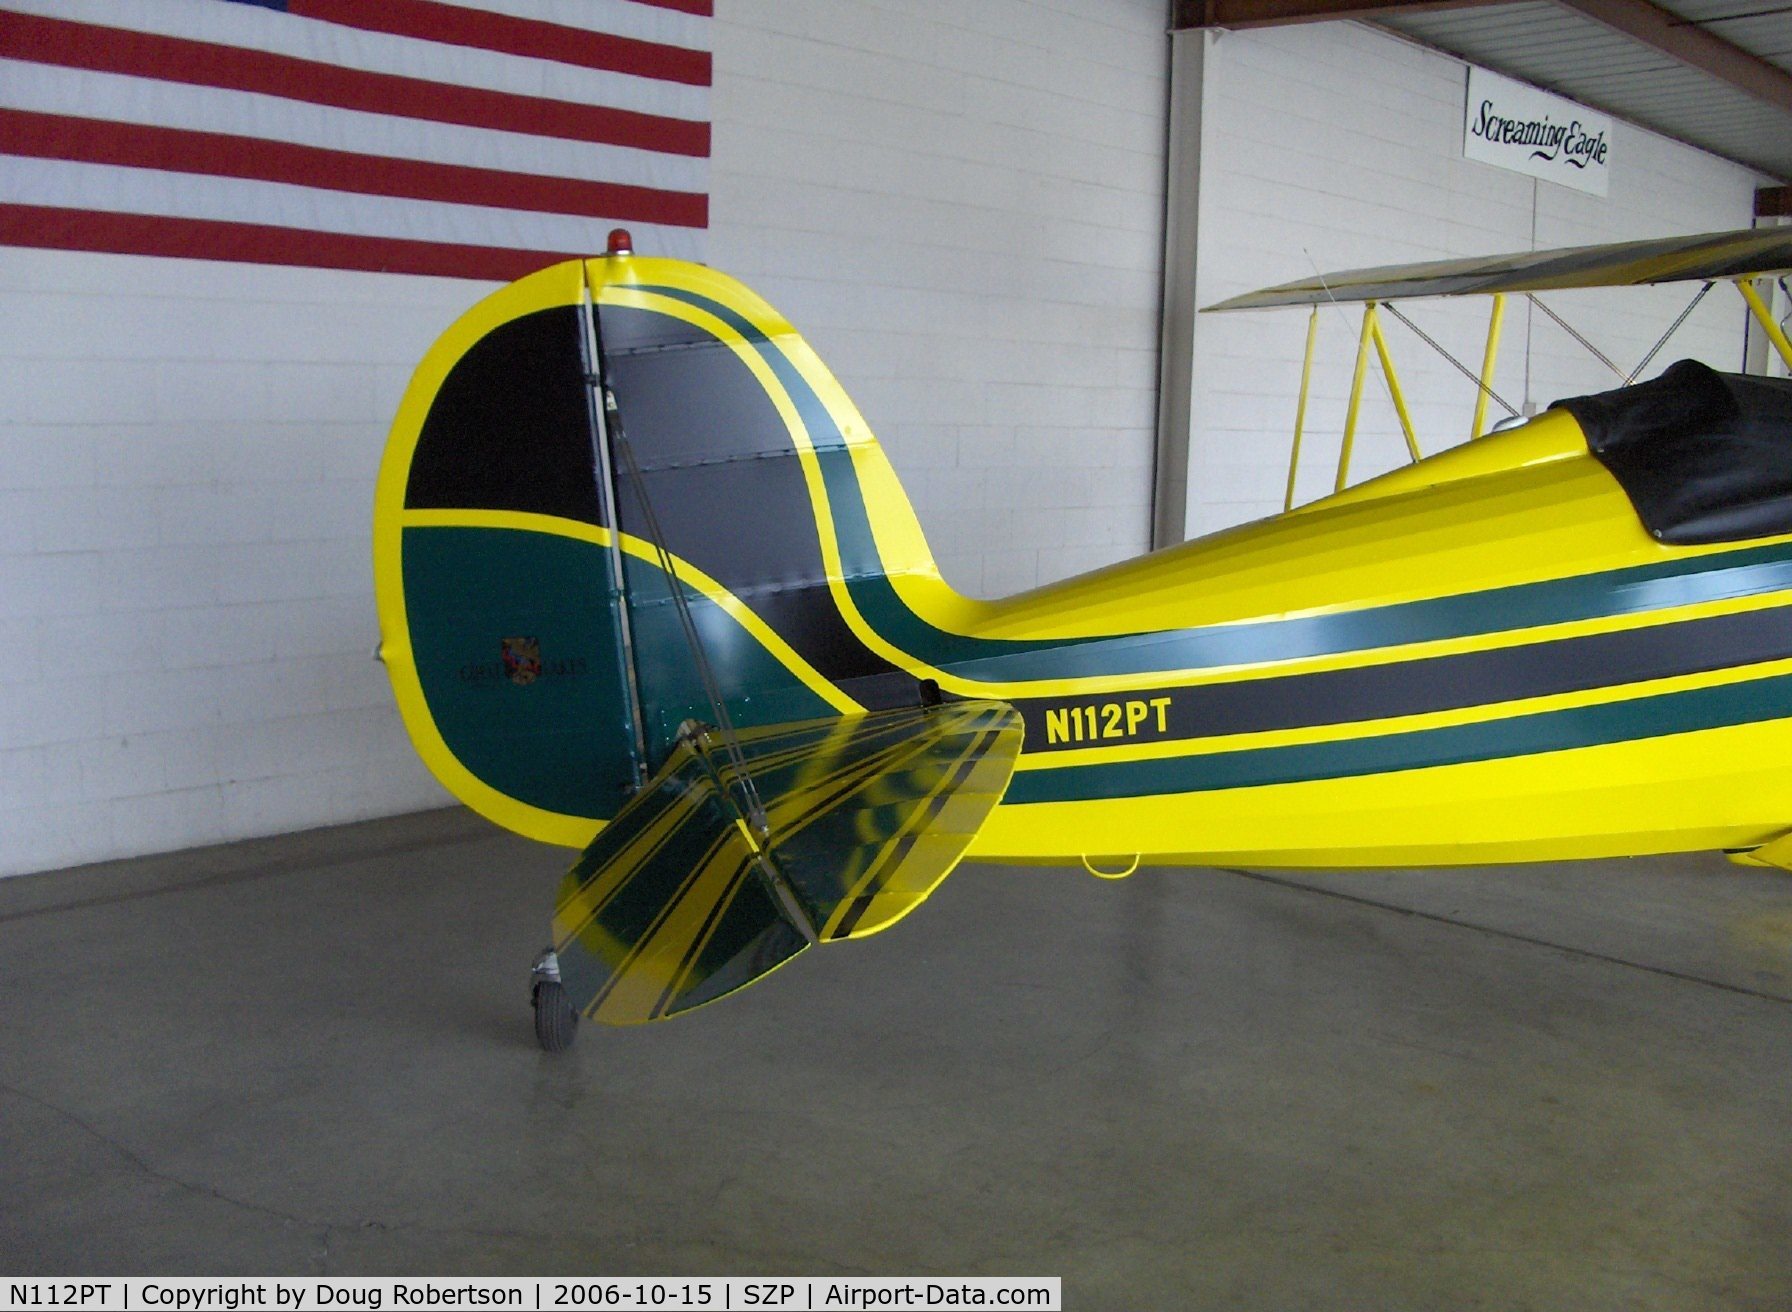 N112PT, 1978 Great Lakes 2T-1A-2 Sport Trainer C/N 0808, 1978 Great Lakes 2T-1A-2, Lycoming IO-360-B1F6 180 Hp, empennage